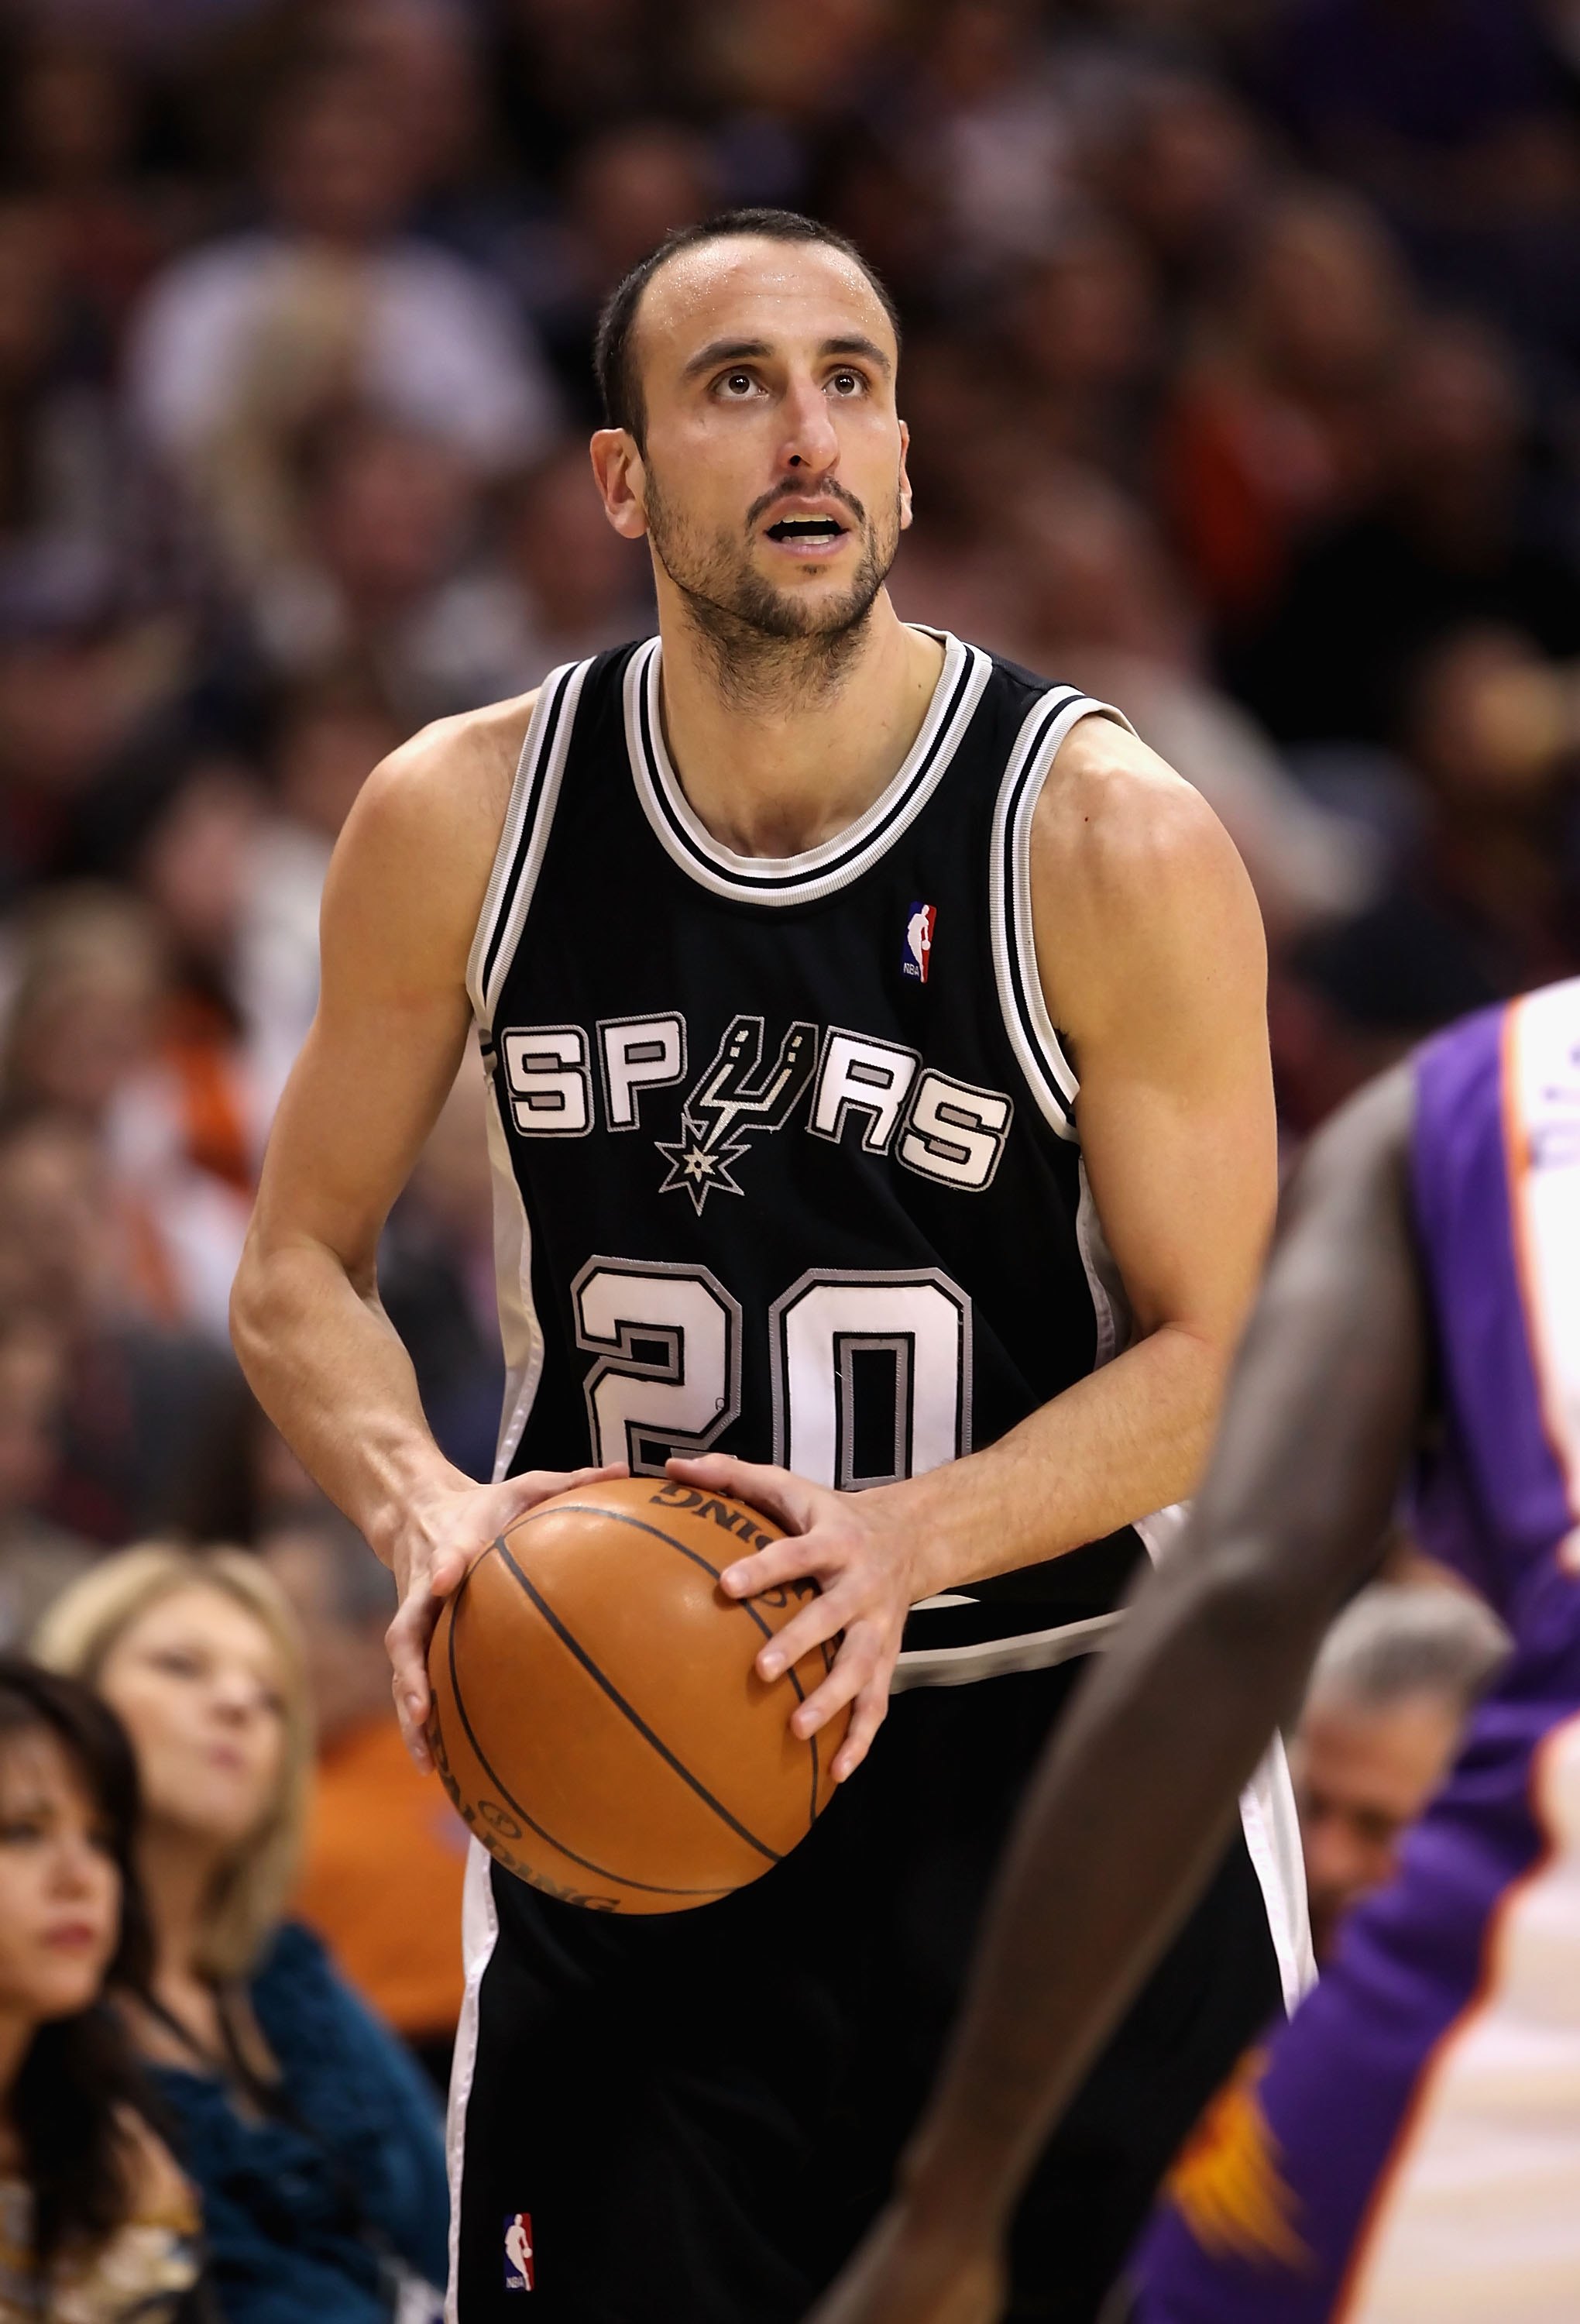 PHOENIX - DECEMBER 15:  Manu Ginobili #20 of the San Antonio Spurs looks to shoot during the NBA game against the Phoenix Suns at US Airways Center on December 15, 2009 in Phoenix, Arizona. The Suns defeated the Spurs 116-104. NOTE TO USER: User expressly